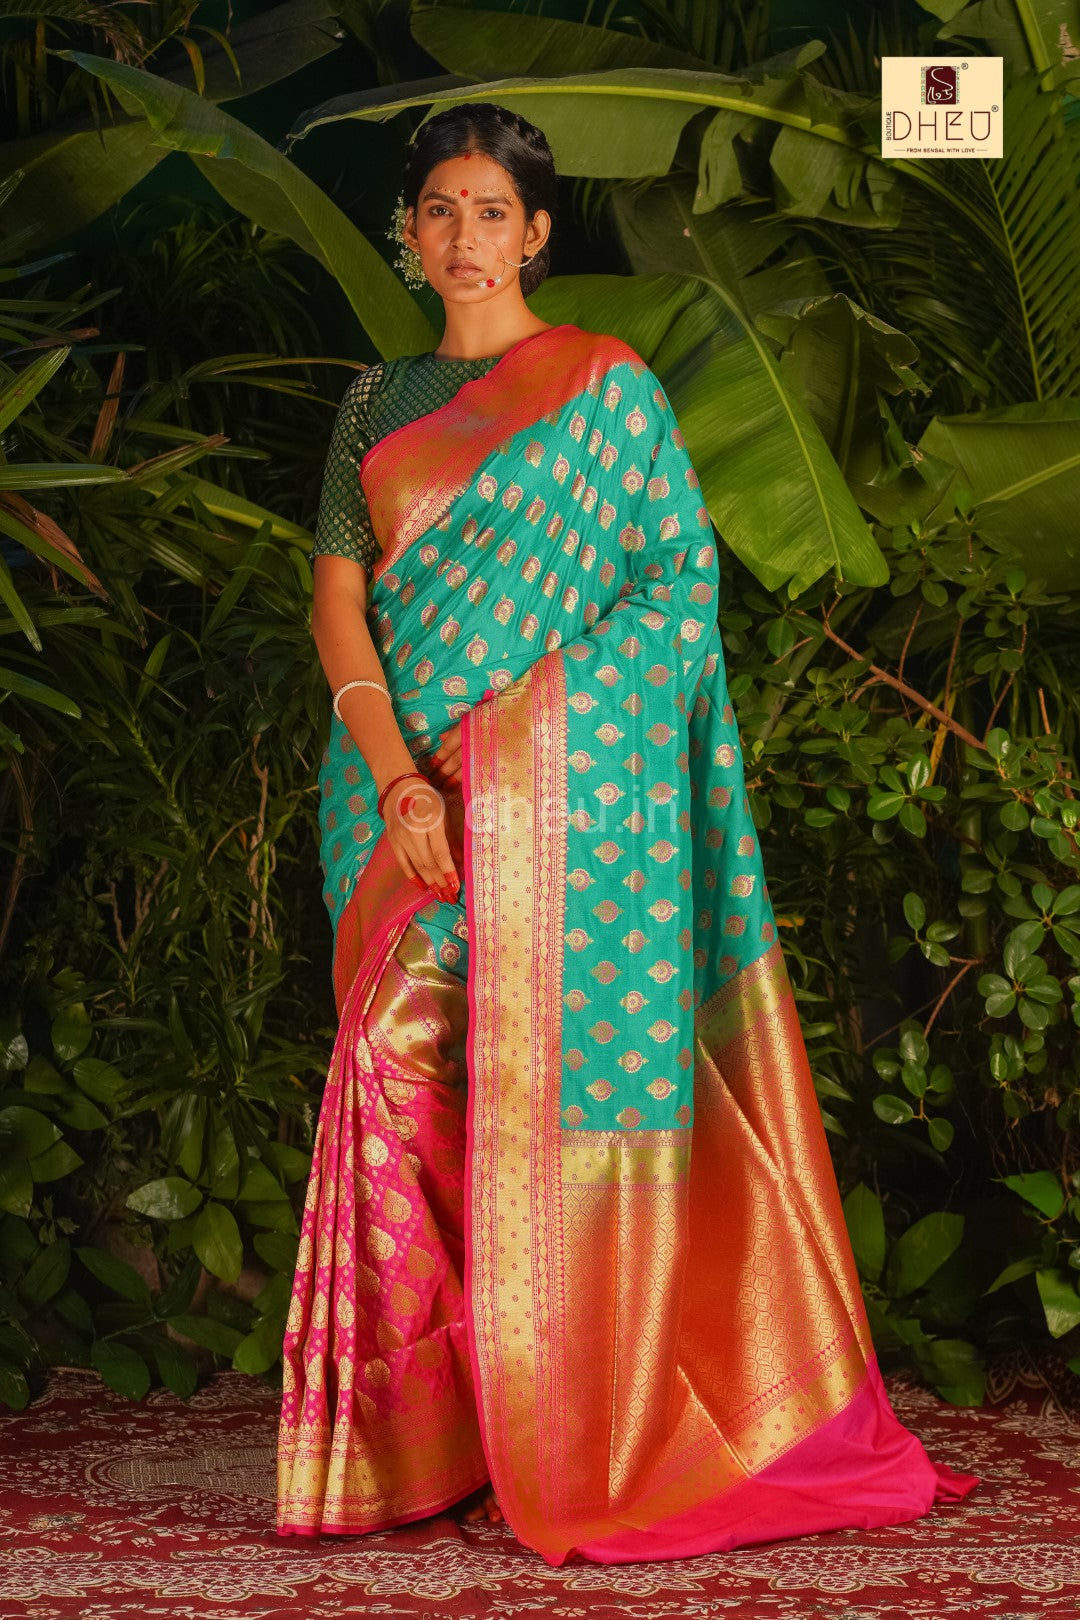 Designer pure benarasi silk saree at lowest cost only at dheu.in